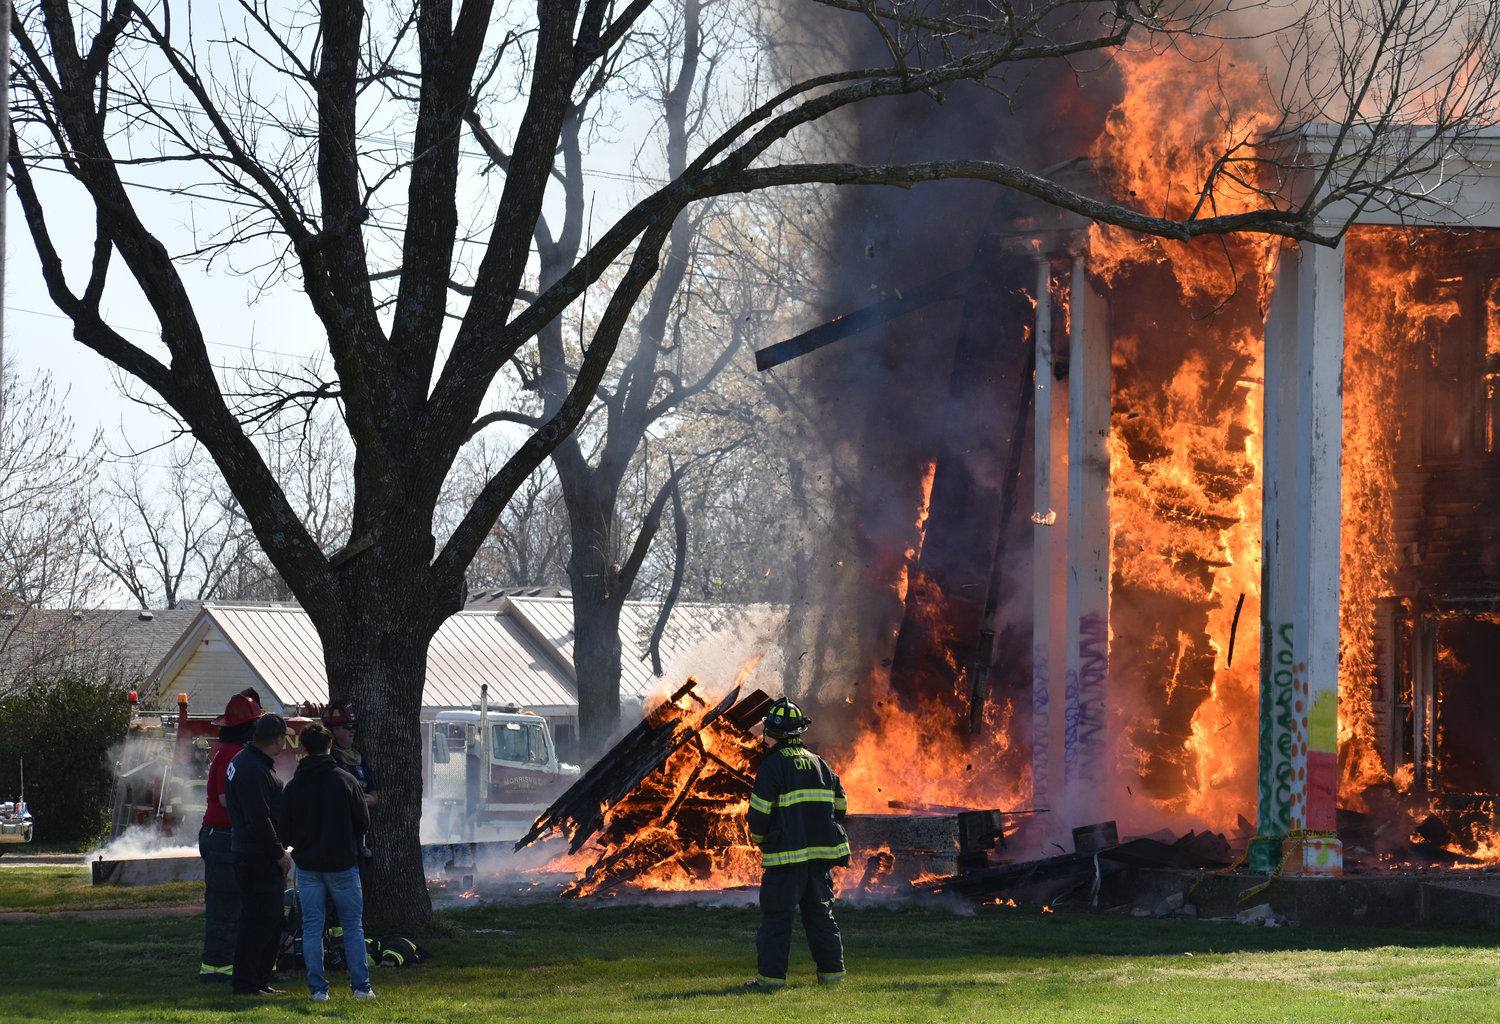 The firefighters look small compared to the backdrop of the burning house as they work the controlled burn Saturday, April 9.